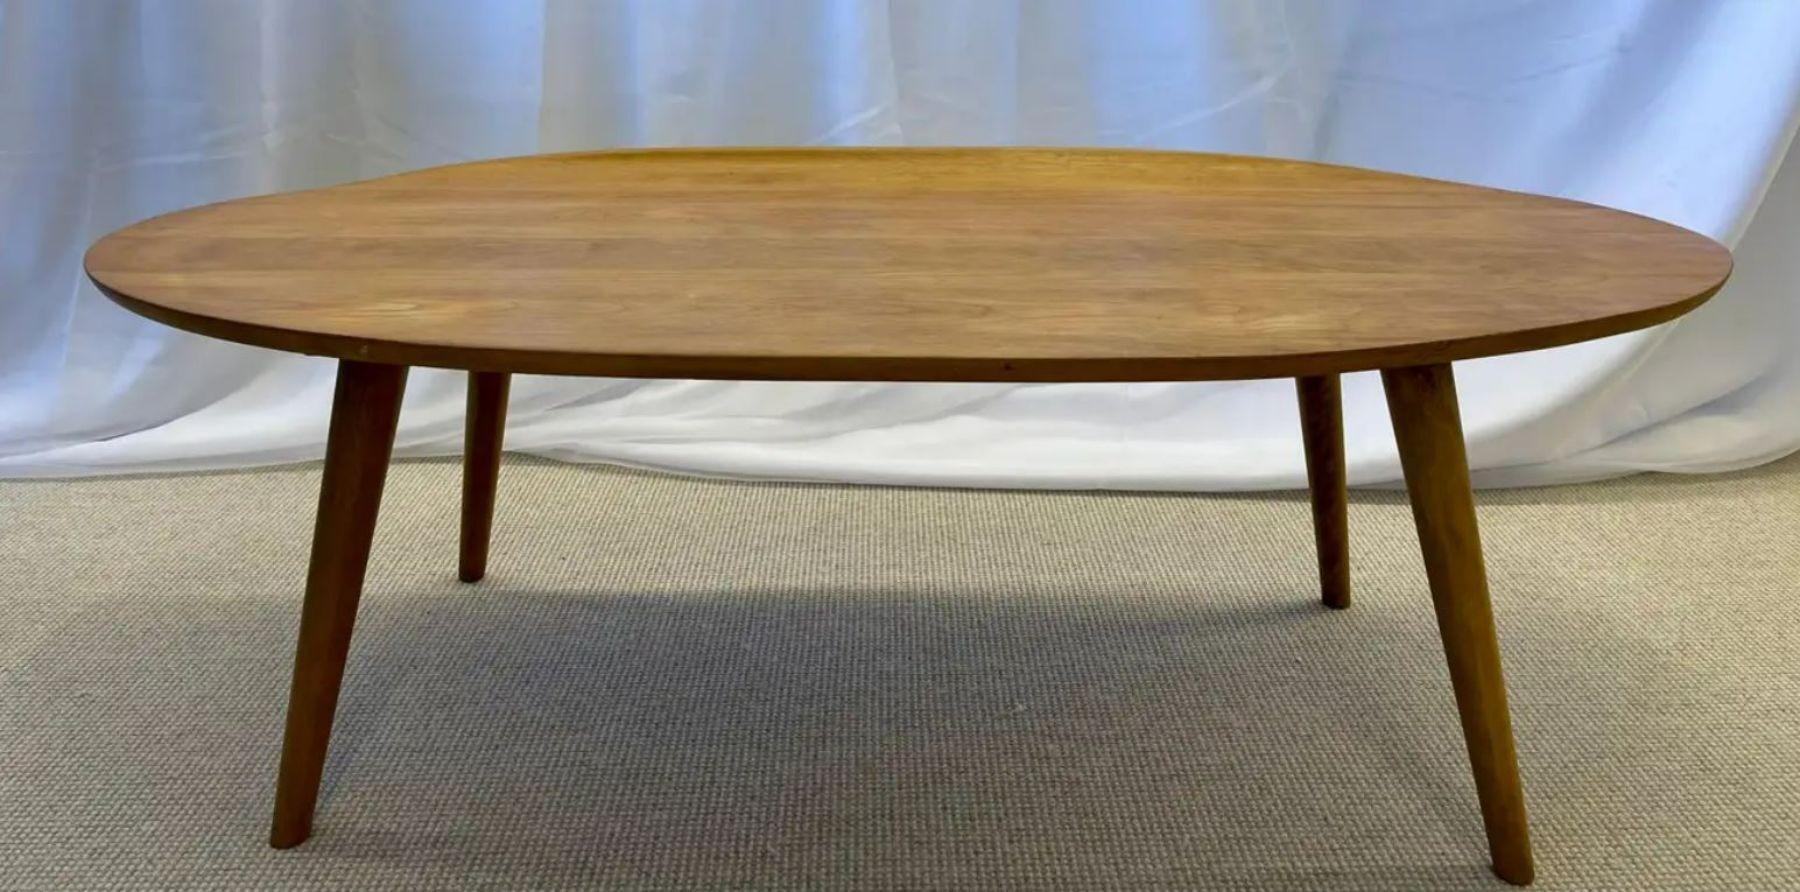 Mid-Century Modern Conant ball coffee table designed by Russel Wright. The Elliptical Coffee Table With Curled Edge is a sleek and stylish example of this designers work in a grained maple. USA, c. 1955 Impressed manufacturer's mark to underside